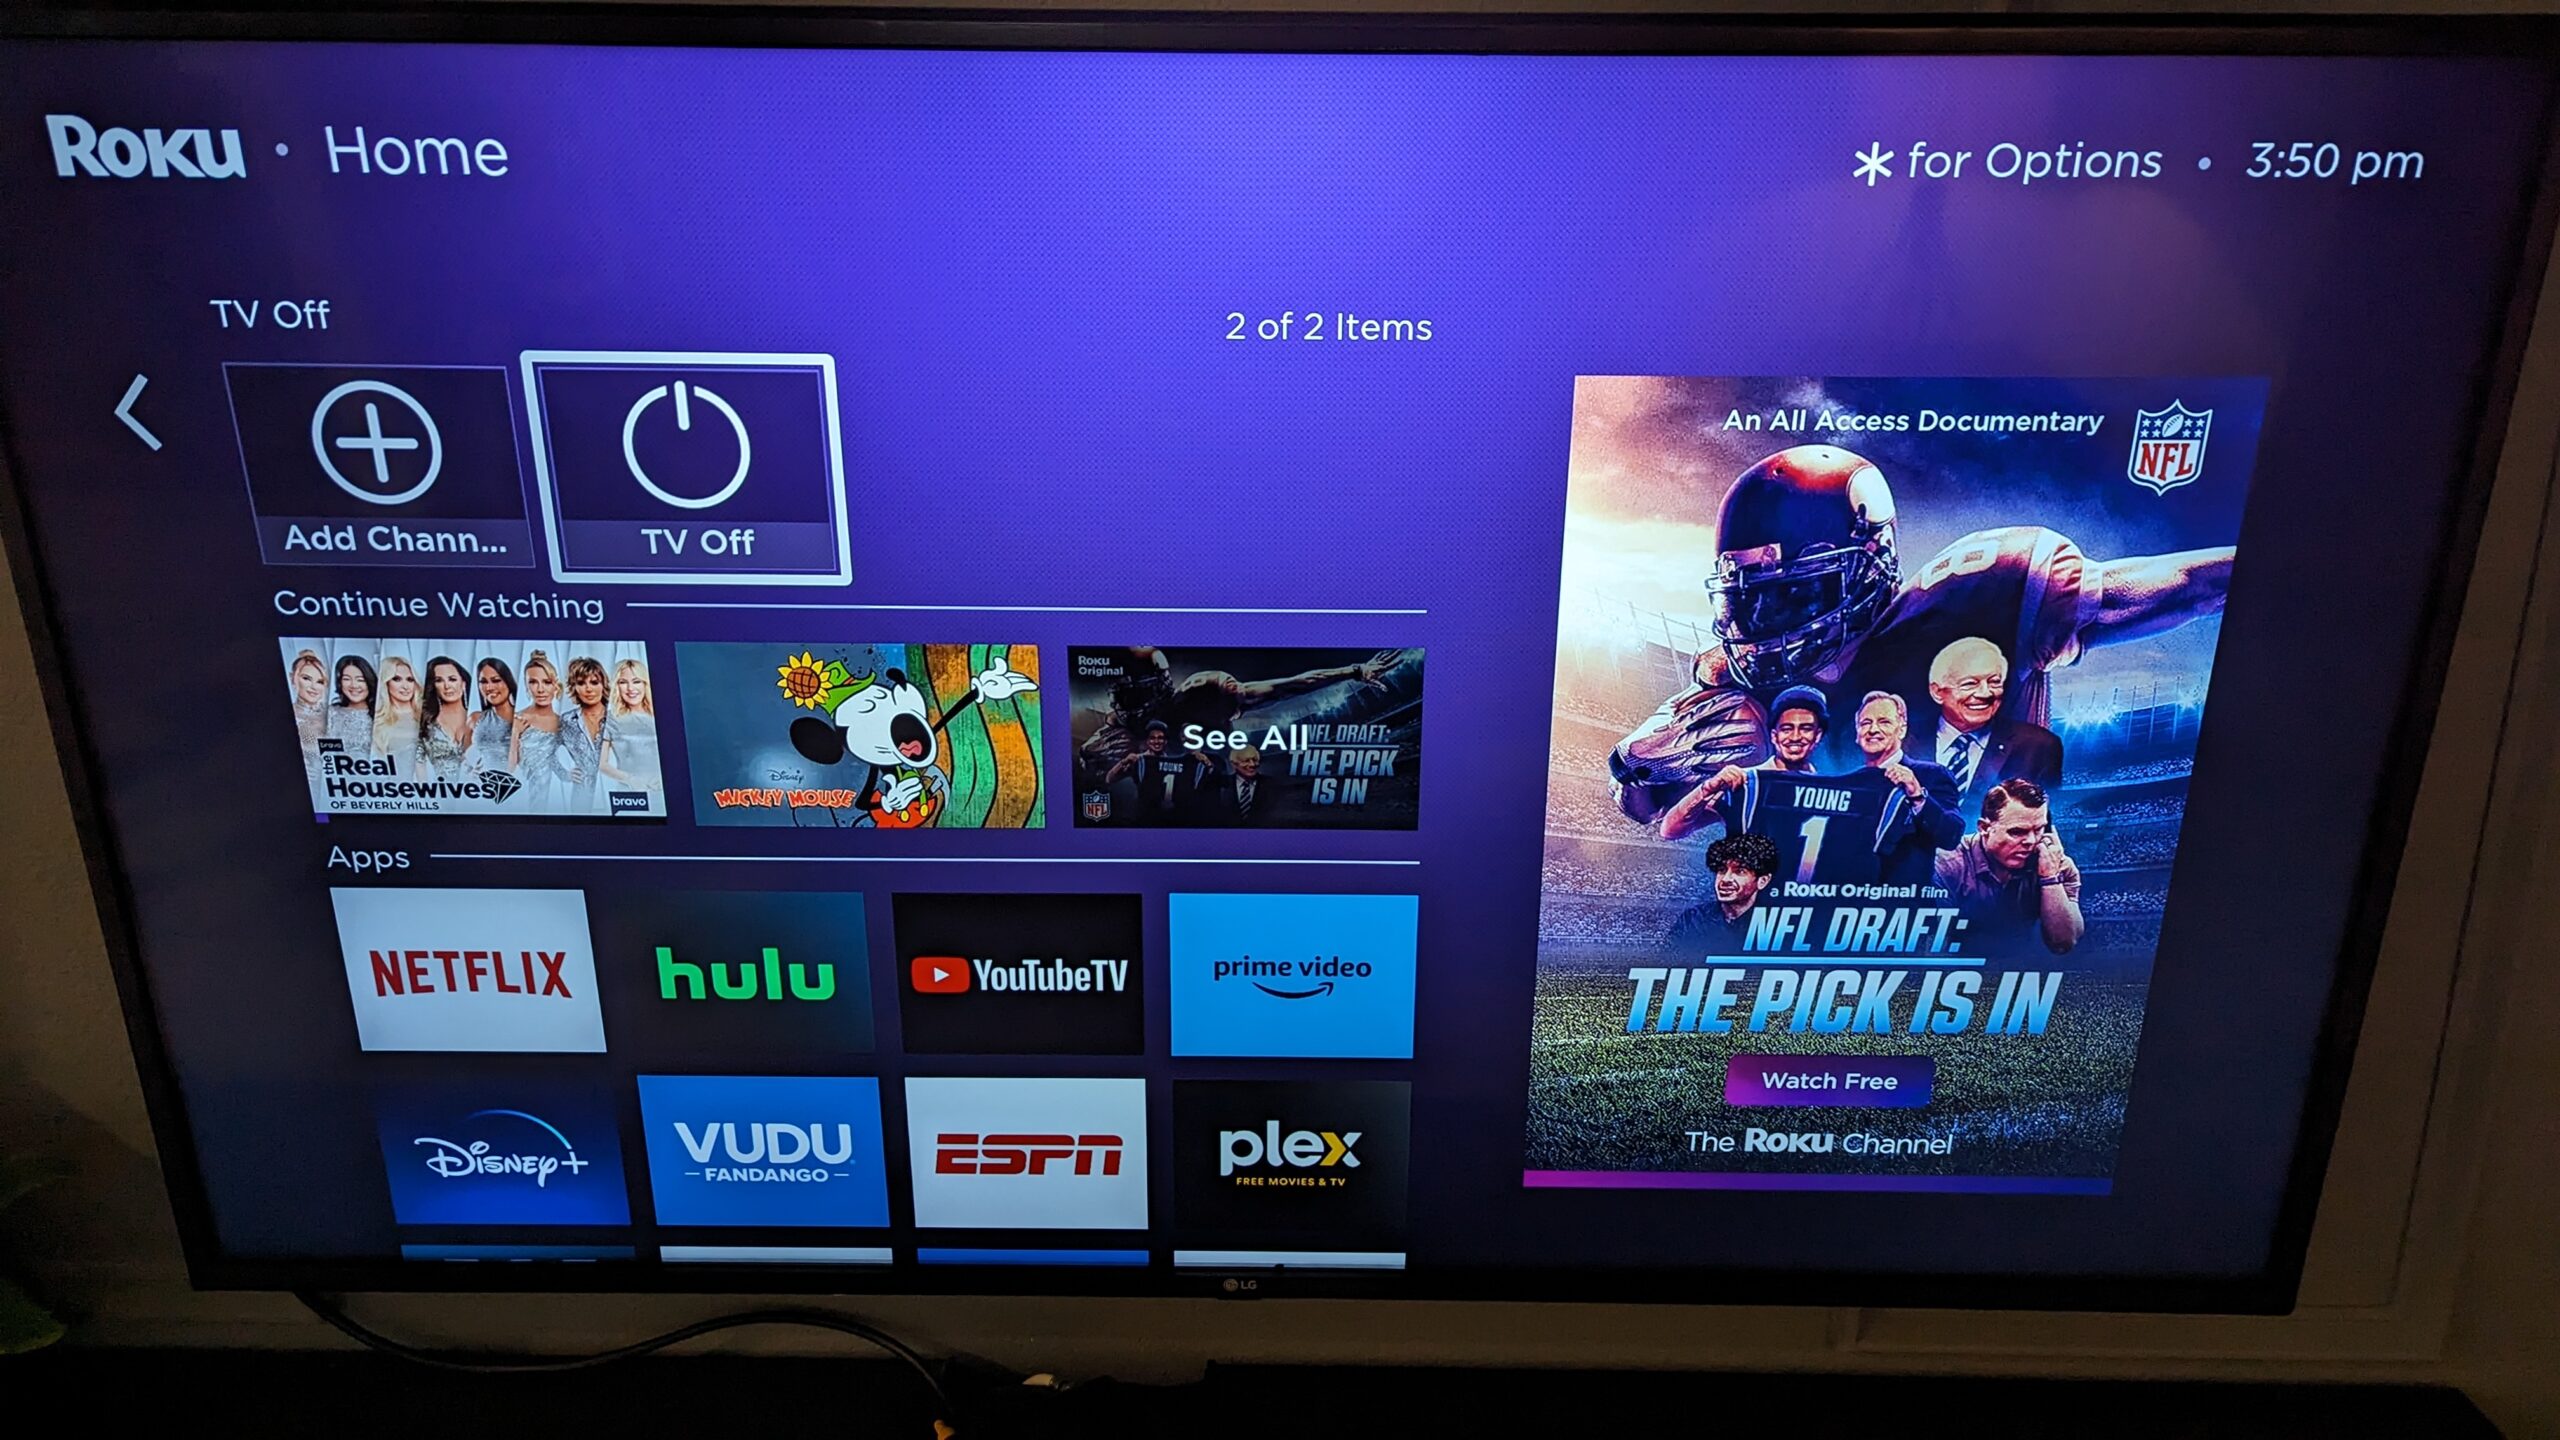 Roku’s New Home Screen Beta Is Rolling Out to Roku Owners & Finally Embraces Apps